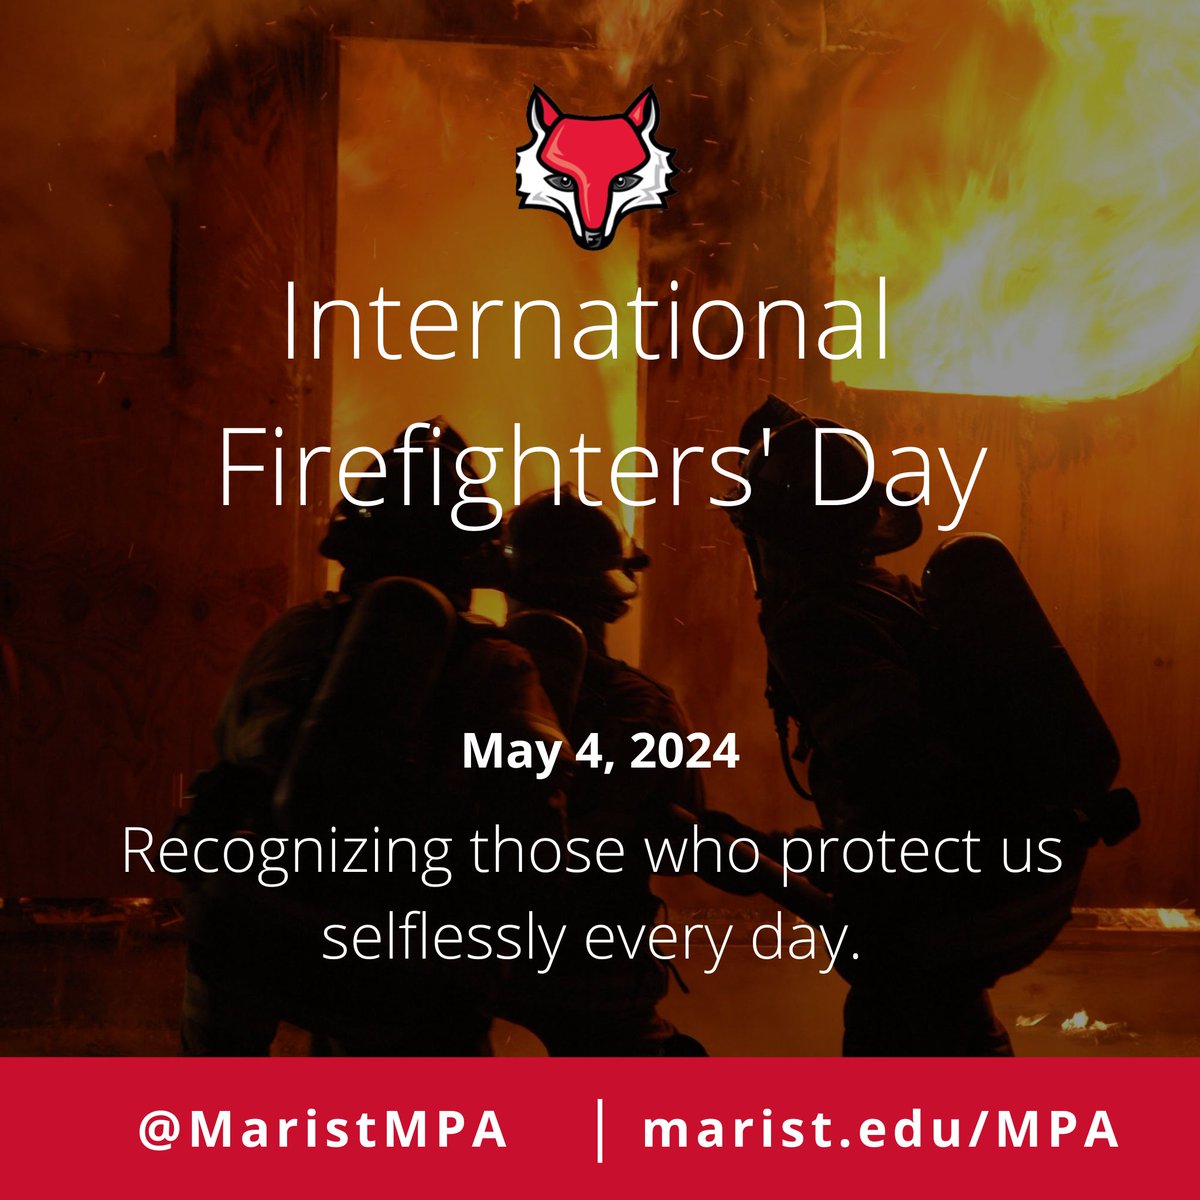 May 4th is International Firefighters' Day, and Marist is proud to recognize our students and alumni who are members of the fire service. We're grateful for their work selflessly protecting lives and property every day. @IAFFofficial, @IAFC, @CtrPubSafExc, @nysfirechiefs, @FASNY